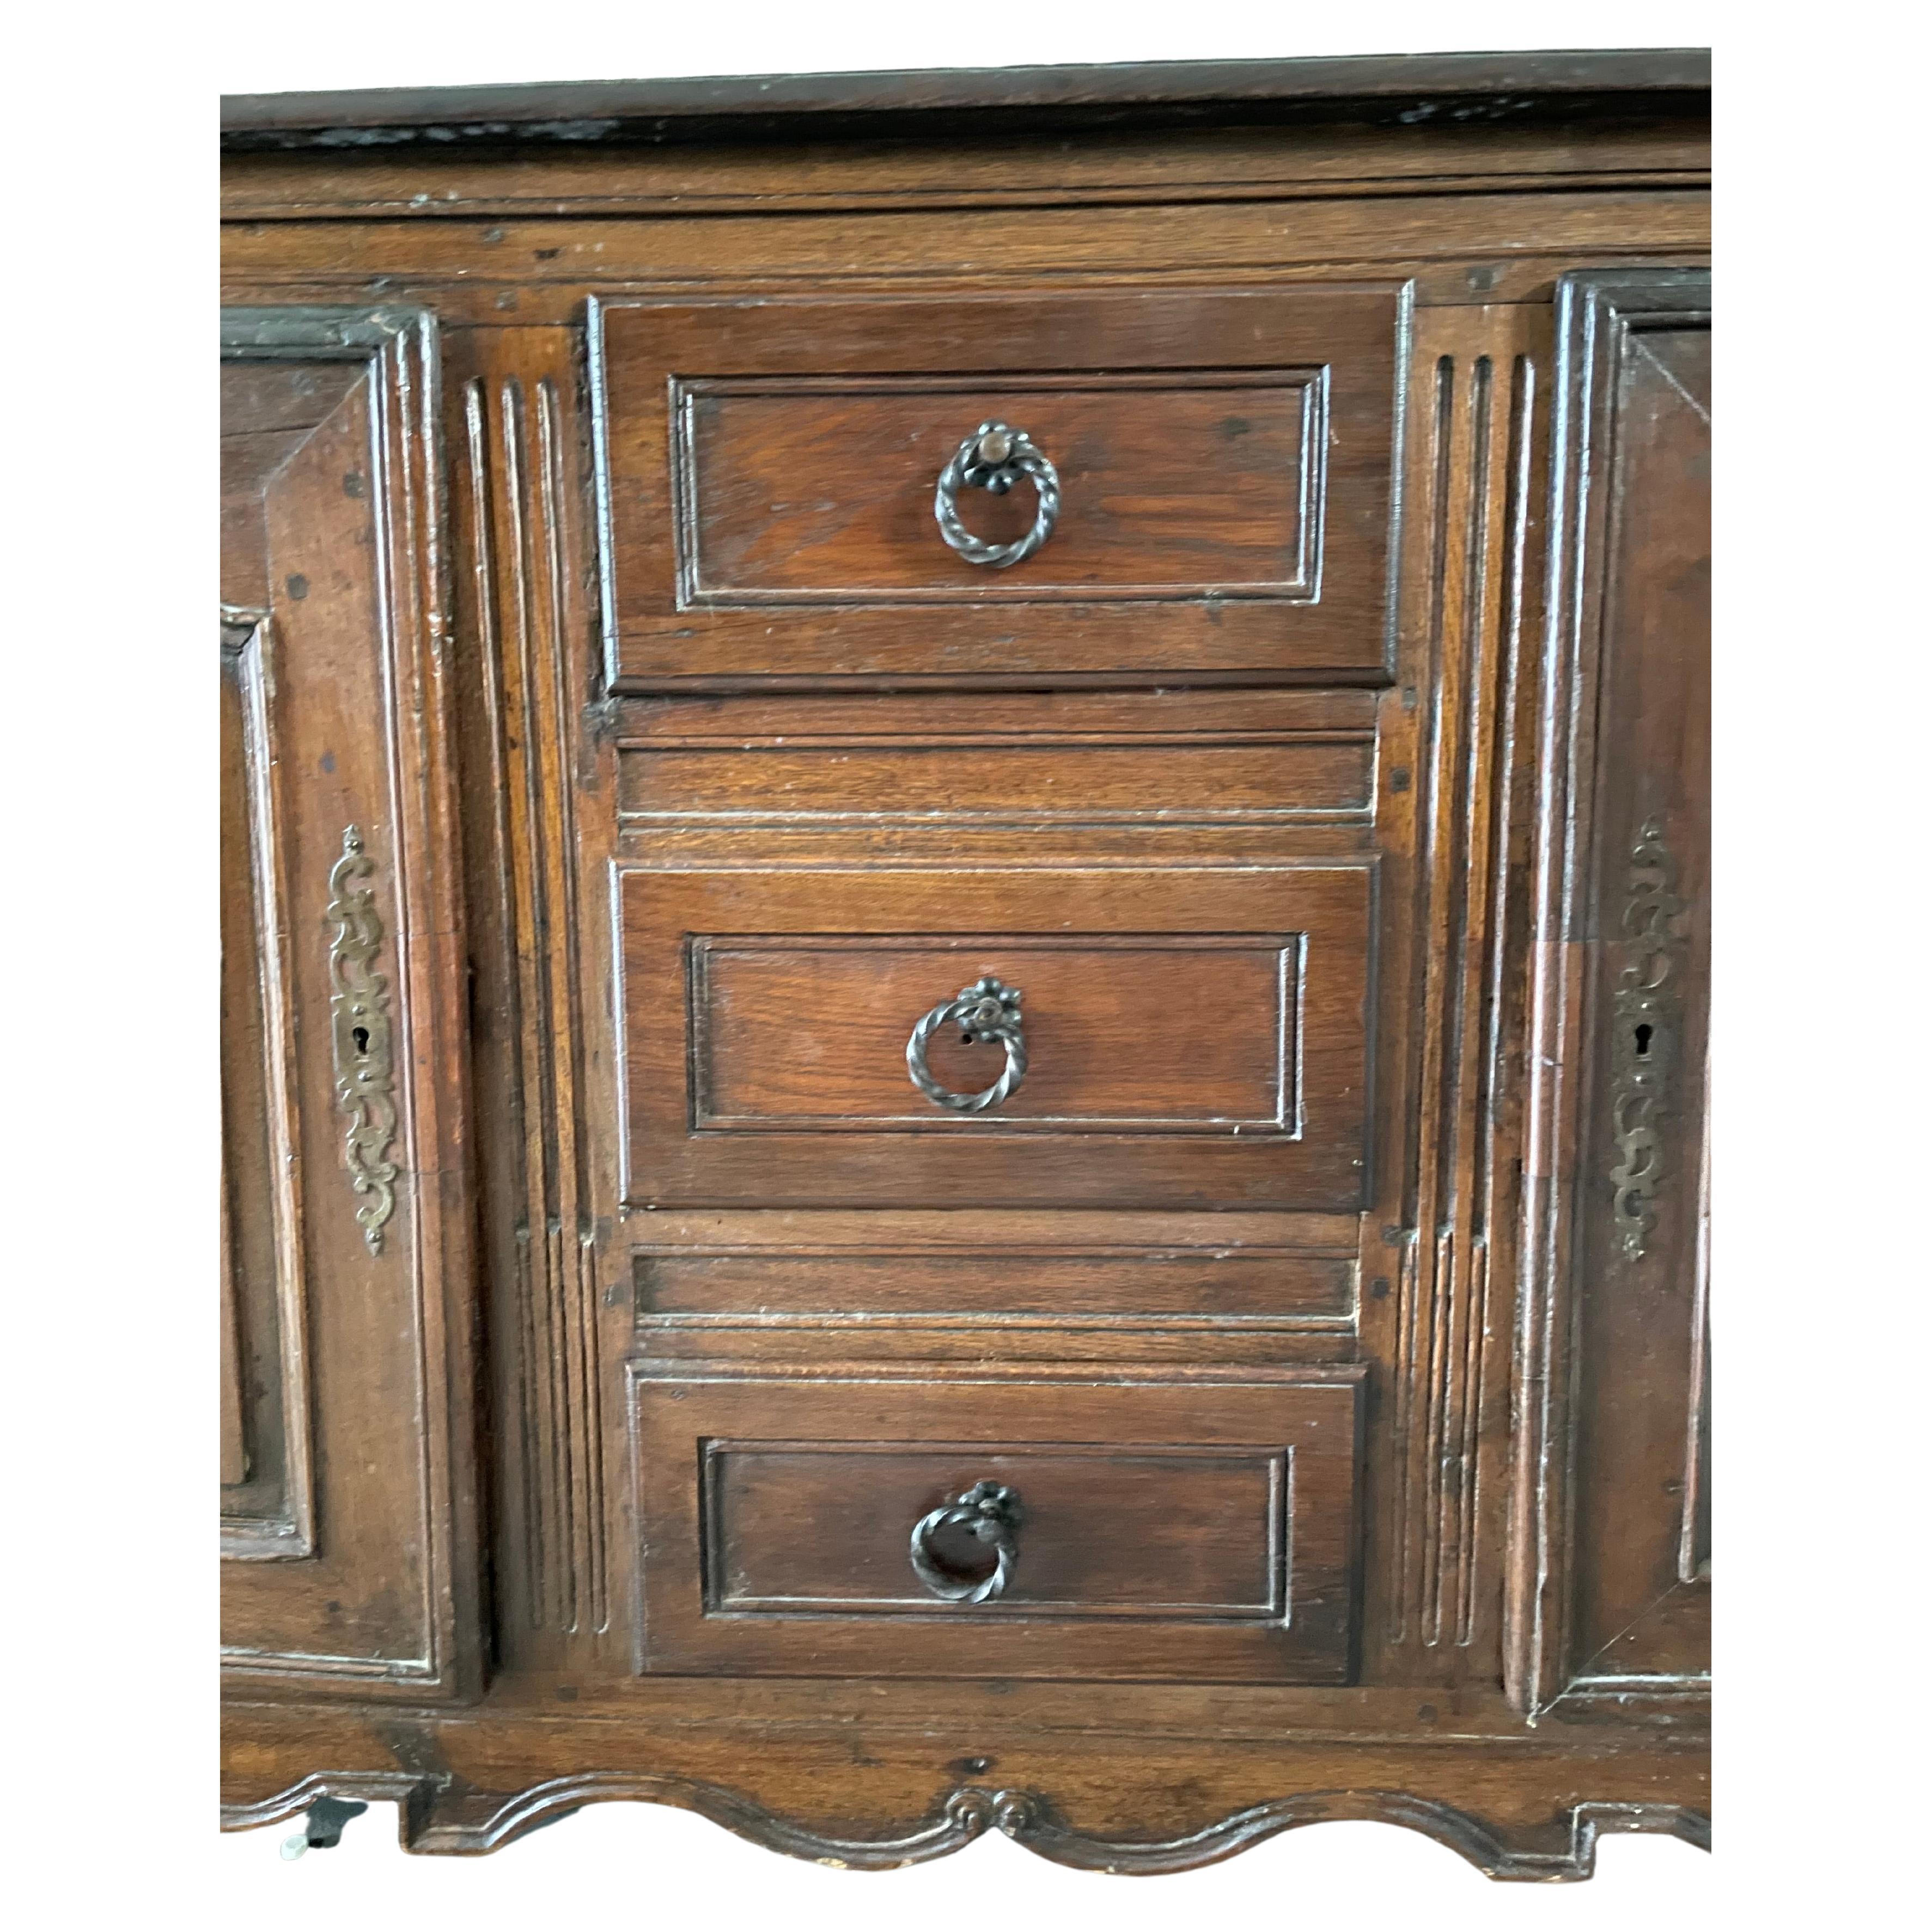 18th century French buffet in oak Louis XV
Two wide doors and 3
central drawers form the facade. Each door is sculpted in motion. The carved lower part gives a nice movement to the whole piece of furniture. The top is made of wood, the patina is